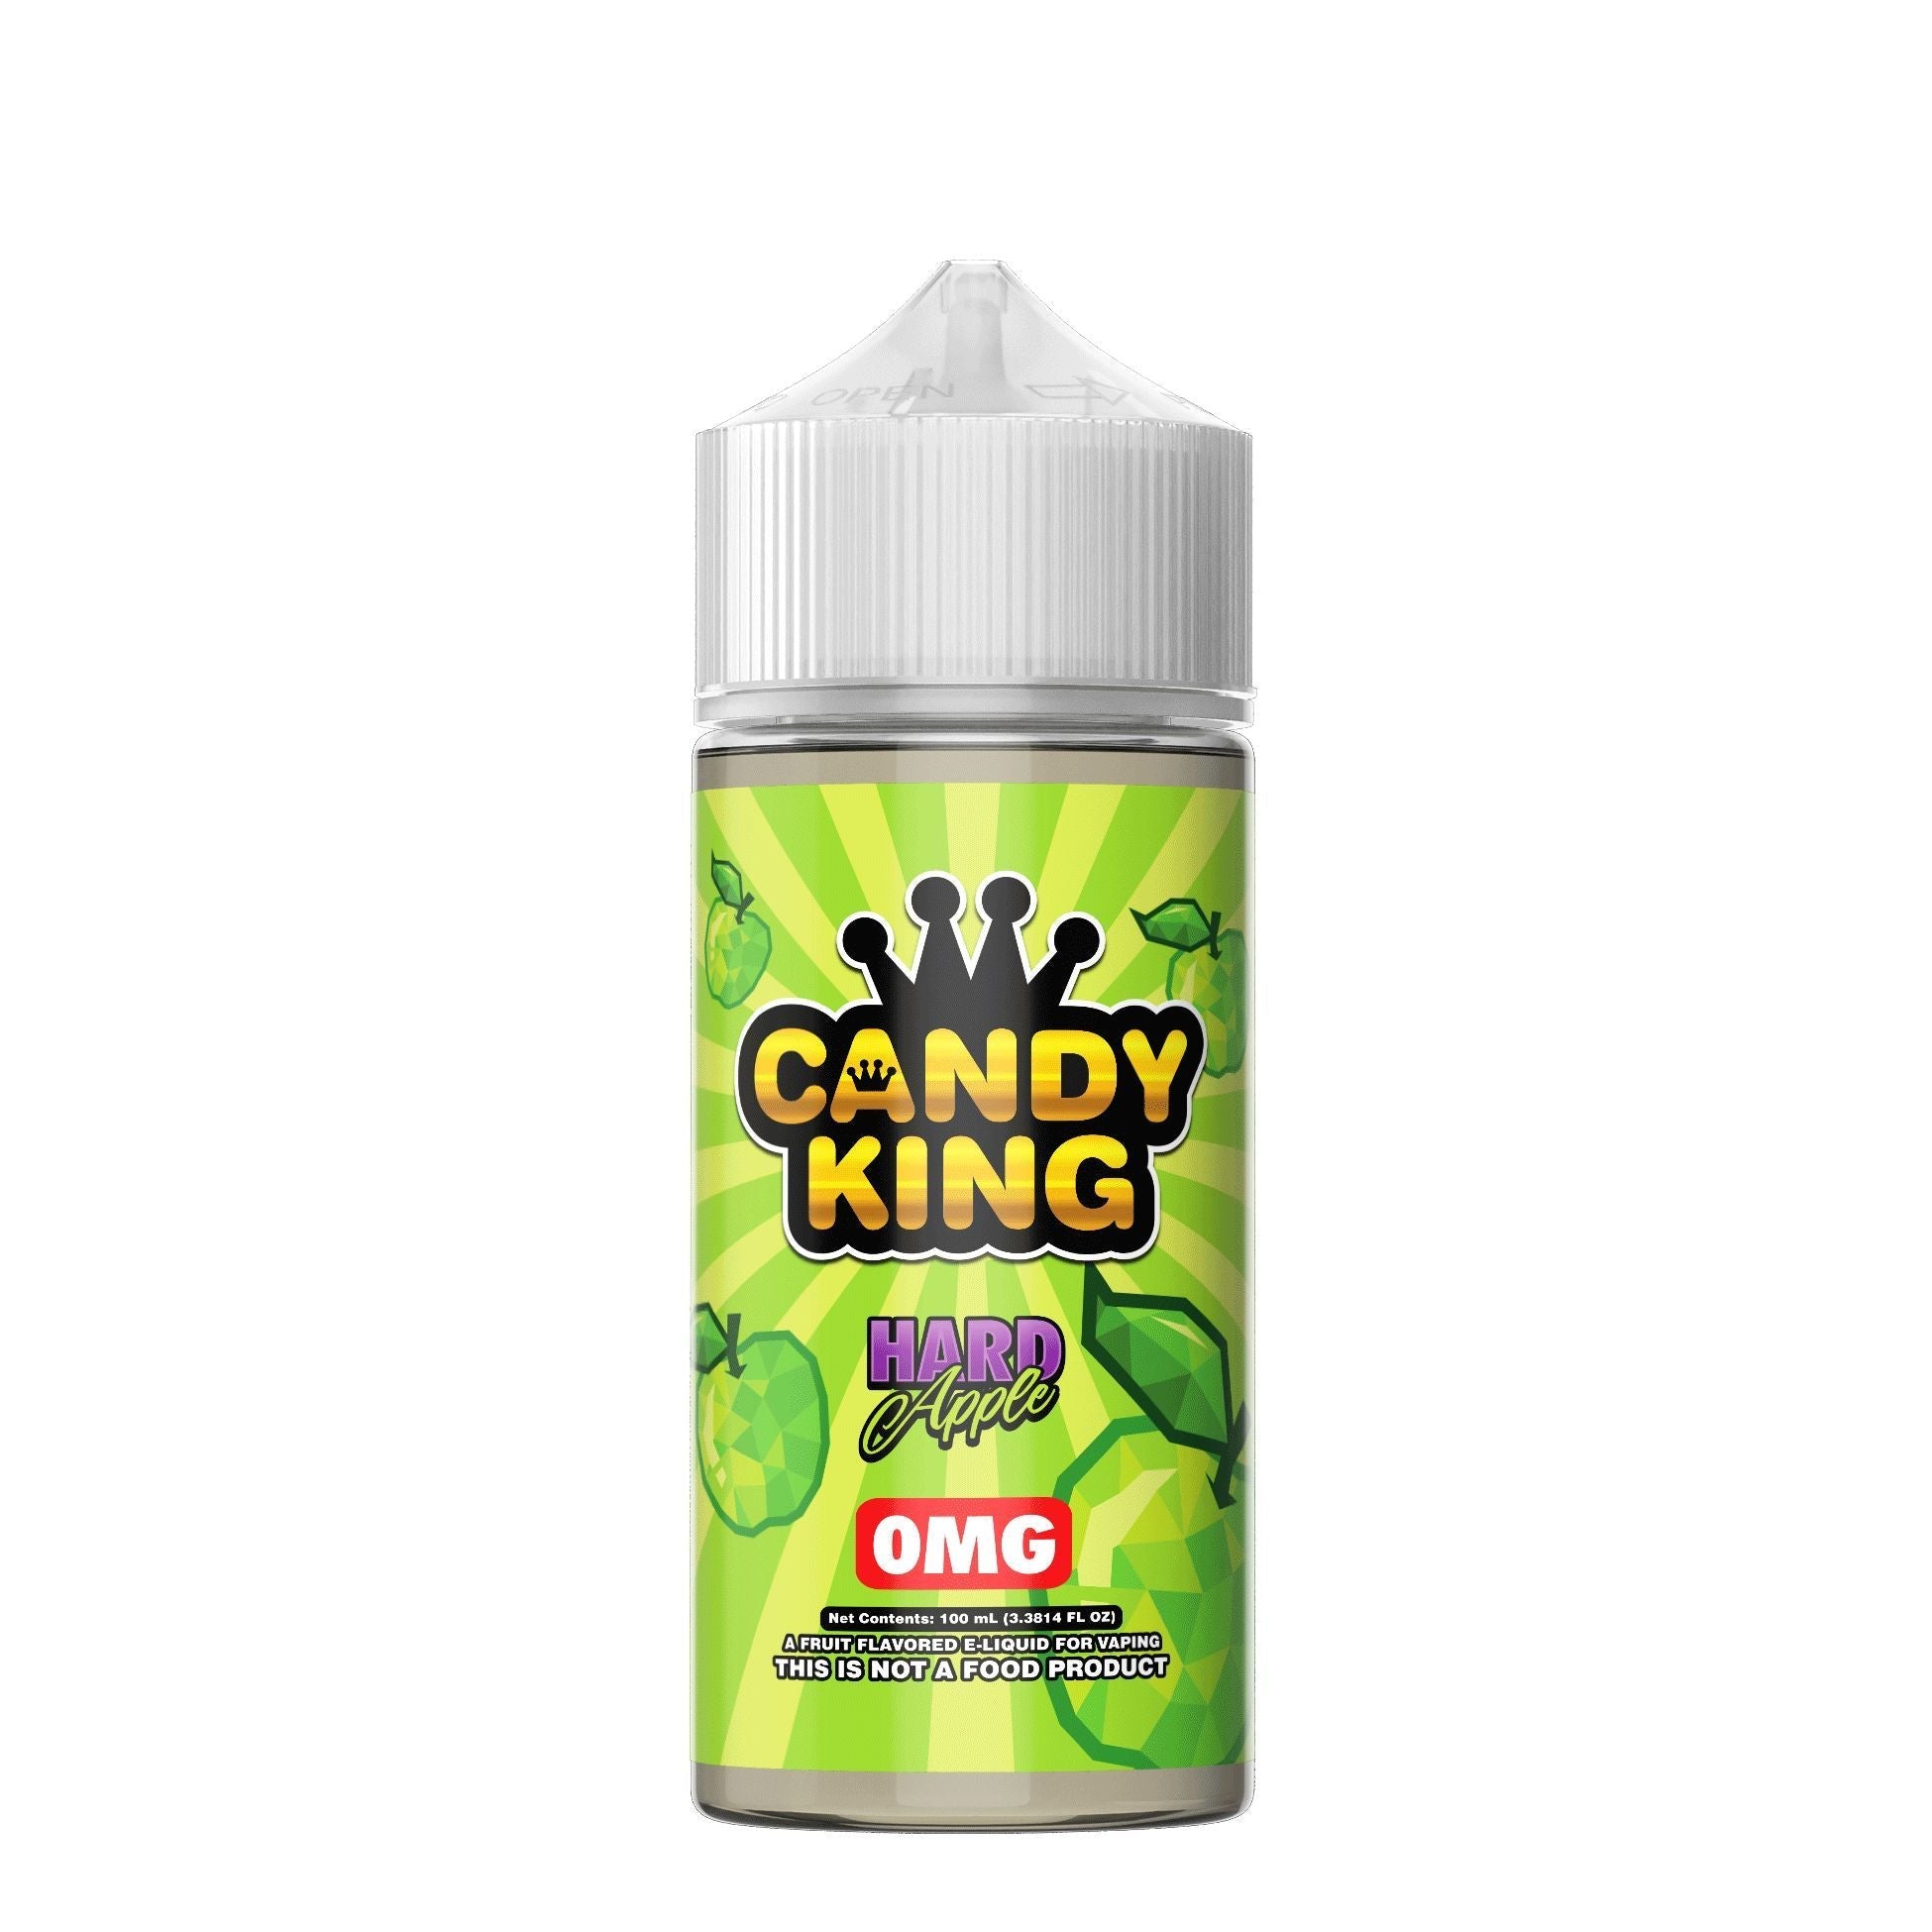 Buy Hard Apple By Candy King - Wick And Wire Co Melbourne Vape Shop, Victoria Australia